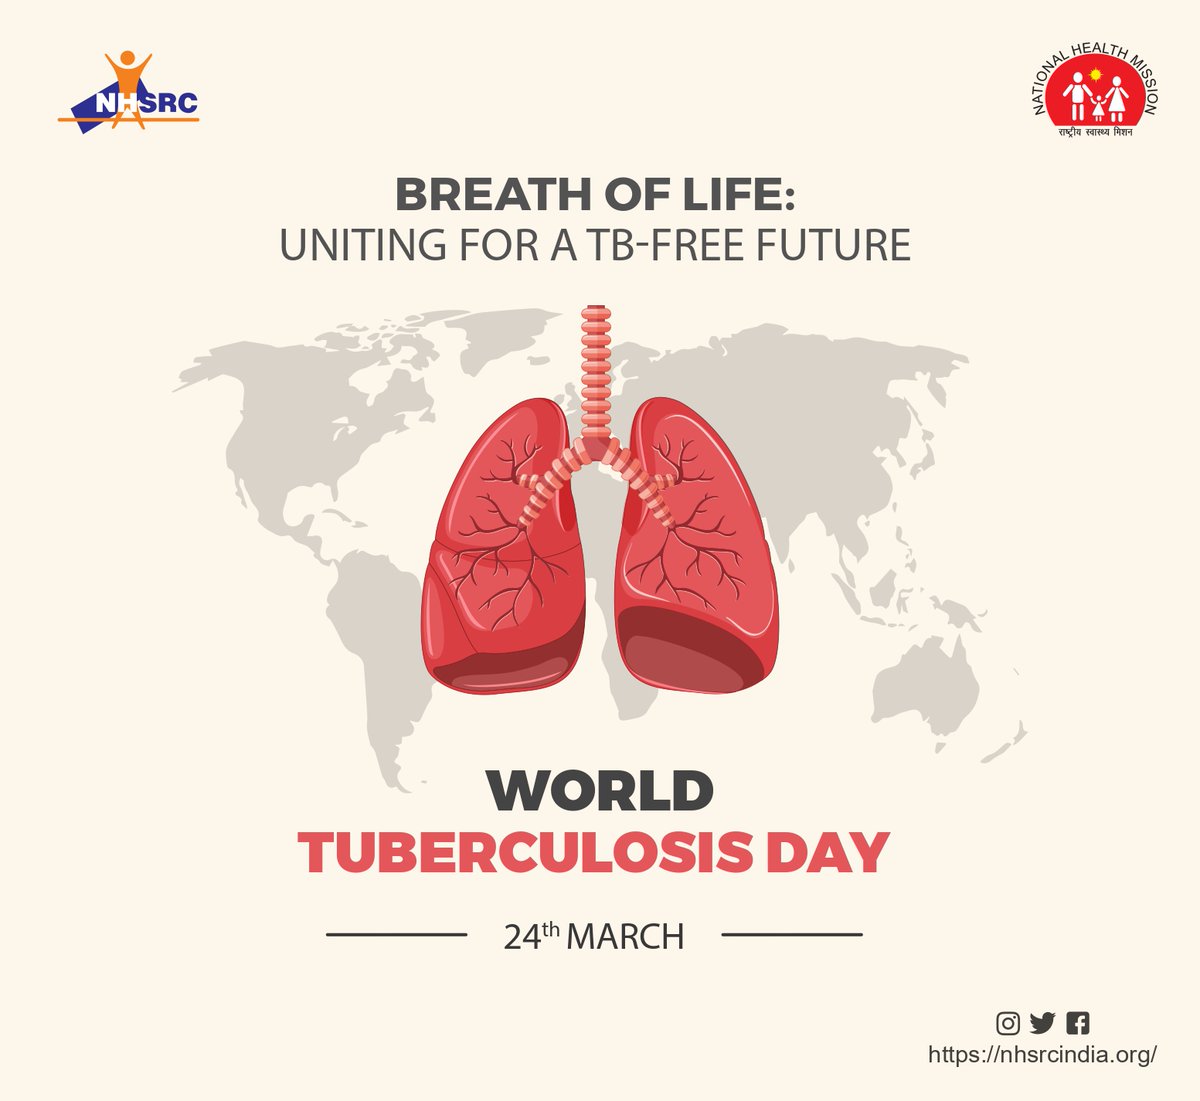 Let's join hands on this #WorldTBDay to unite in the fight against tuberculosis. Visit your nearest Ayushman Arogya Mandir for assistance, resources, and support for TB prevention and treatment services. Together, let's work towards a TB-free future! #EndTB #HealthForAll